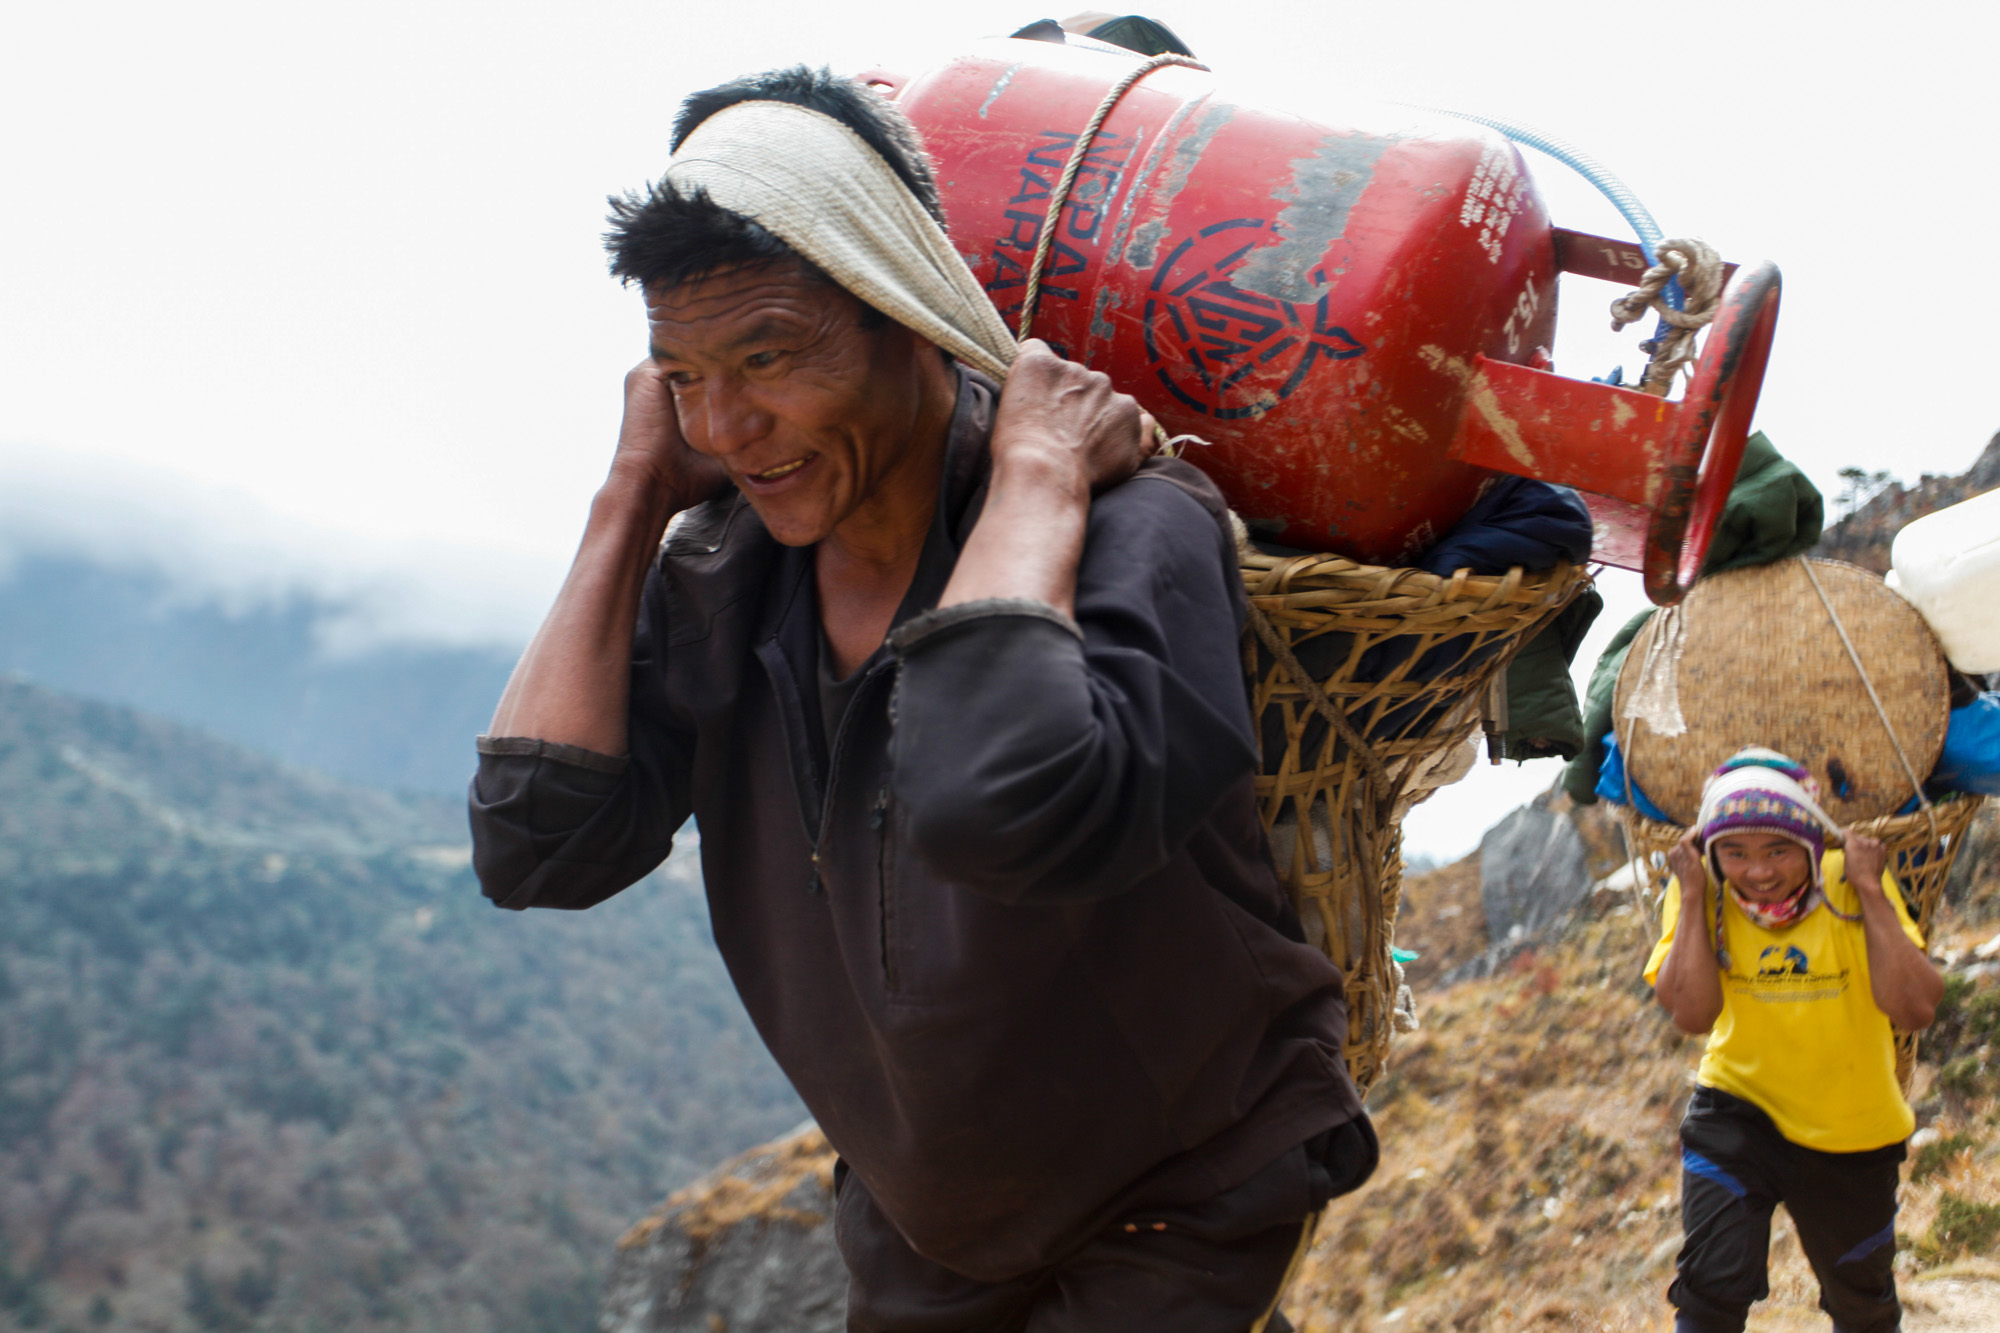 Sherpa smiling, while carrying a heavy load